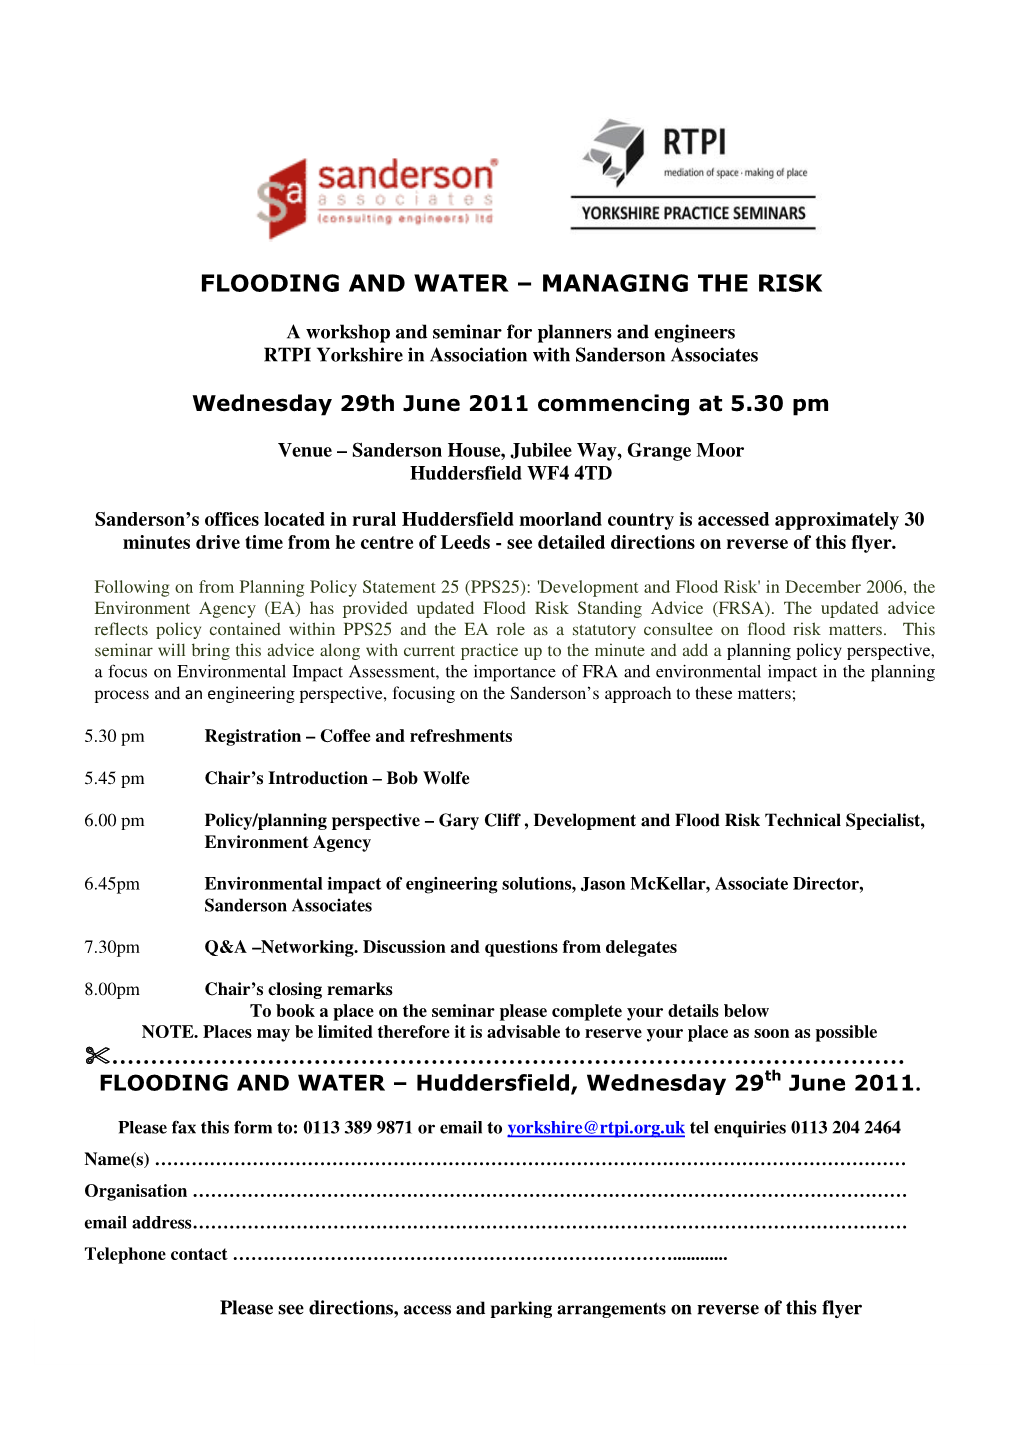 Flooding and Water – Managing the Risk